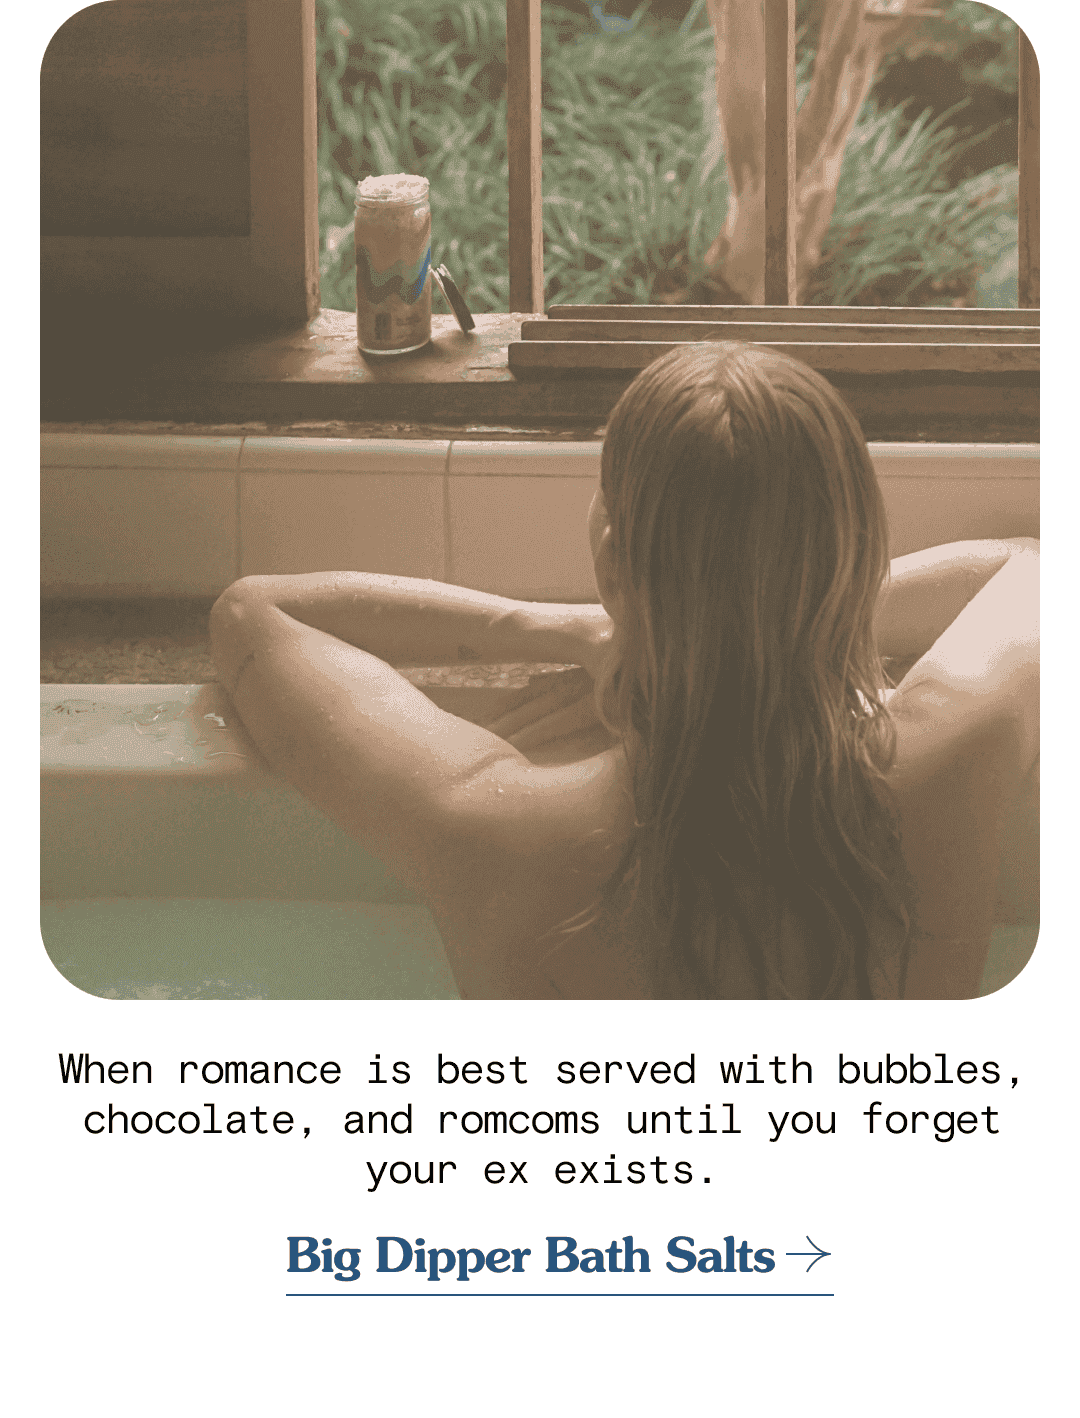 When romance is best served with bubbles, chocolate, and romcoms until you forget your ex exists. Big Dipper Bath Salts